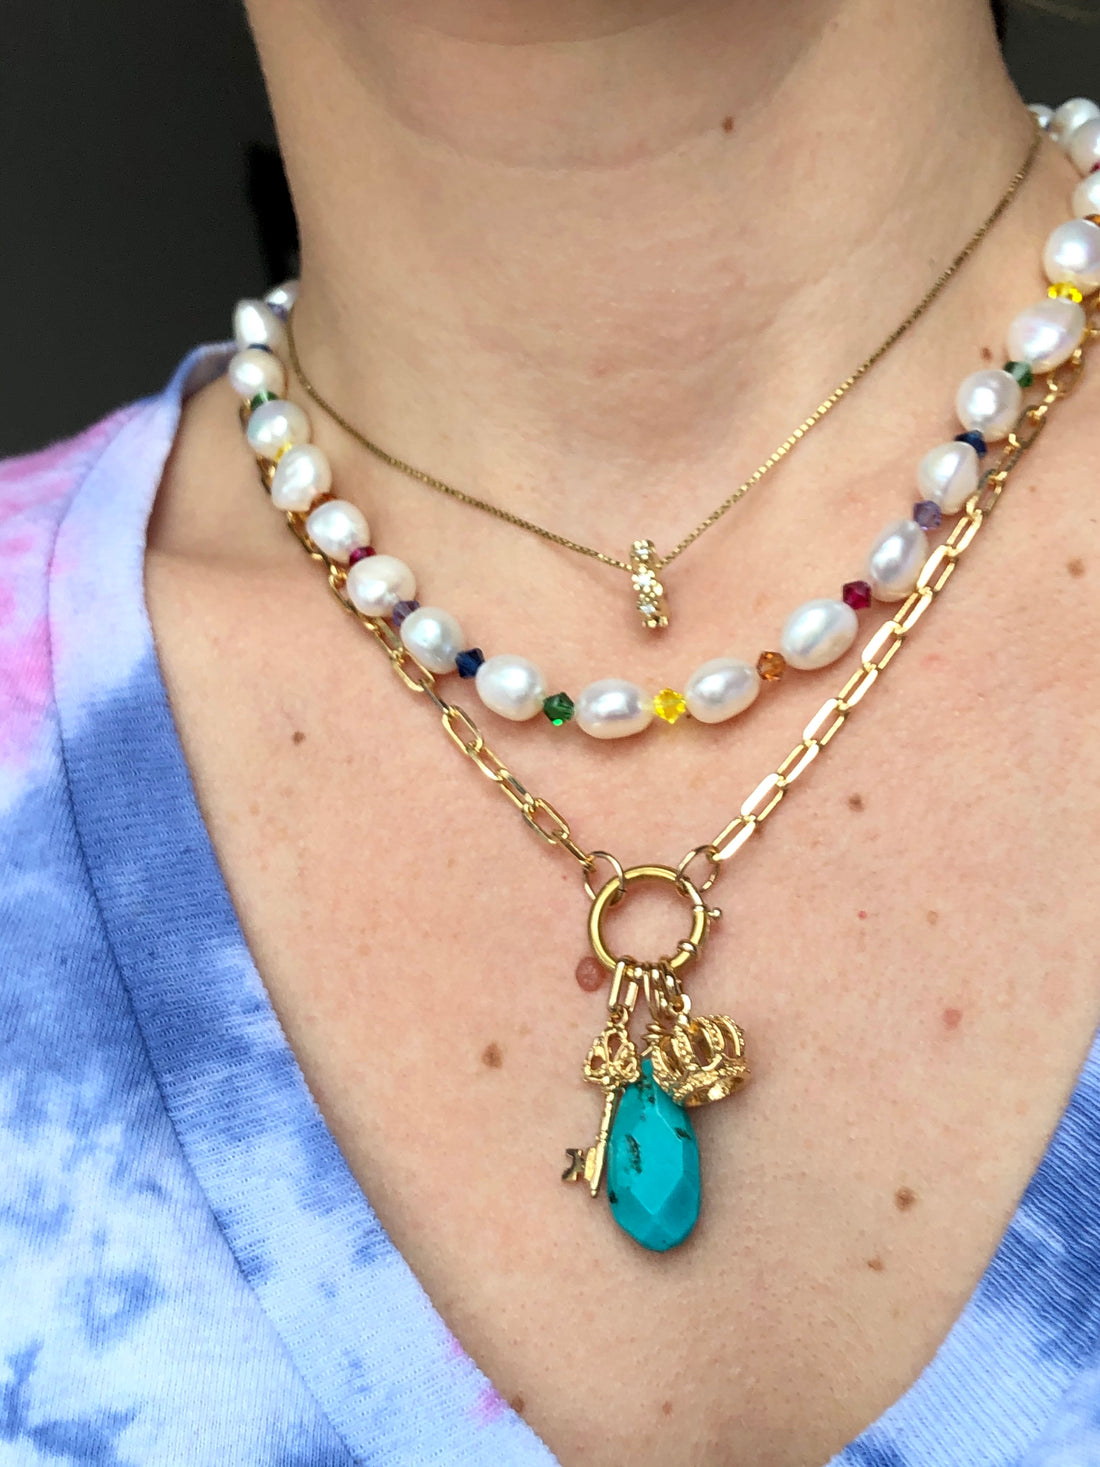 Necklace Style Guide: 8 Easy Tips to get you Layering Like a Pro!